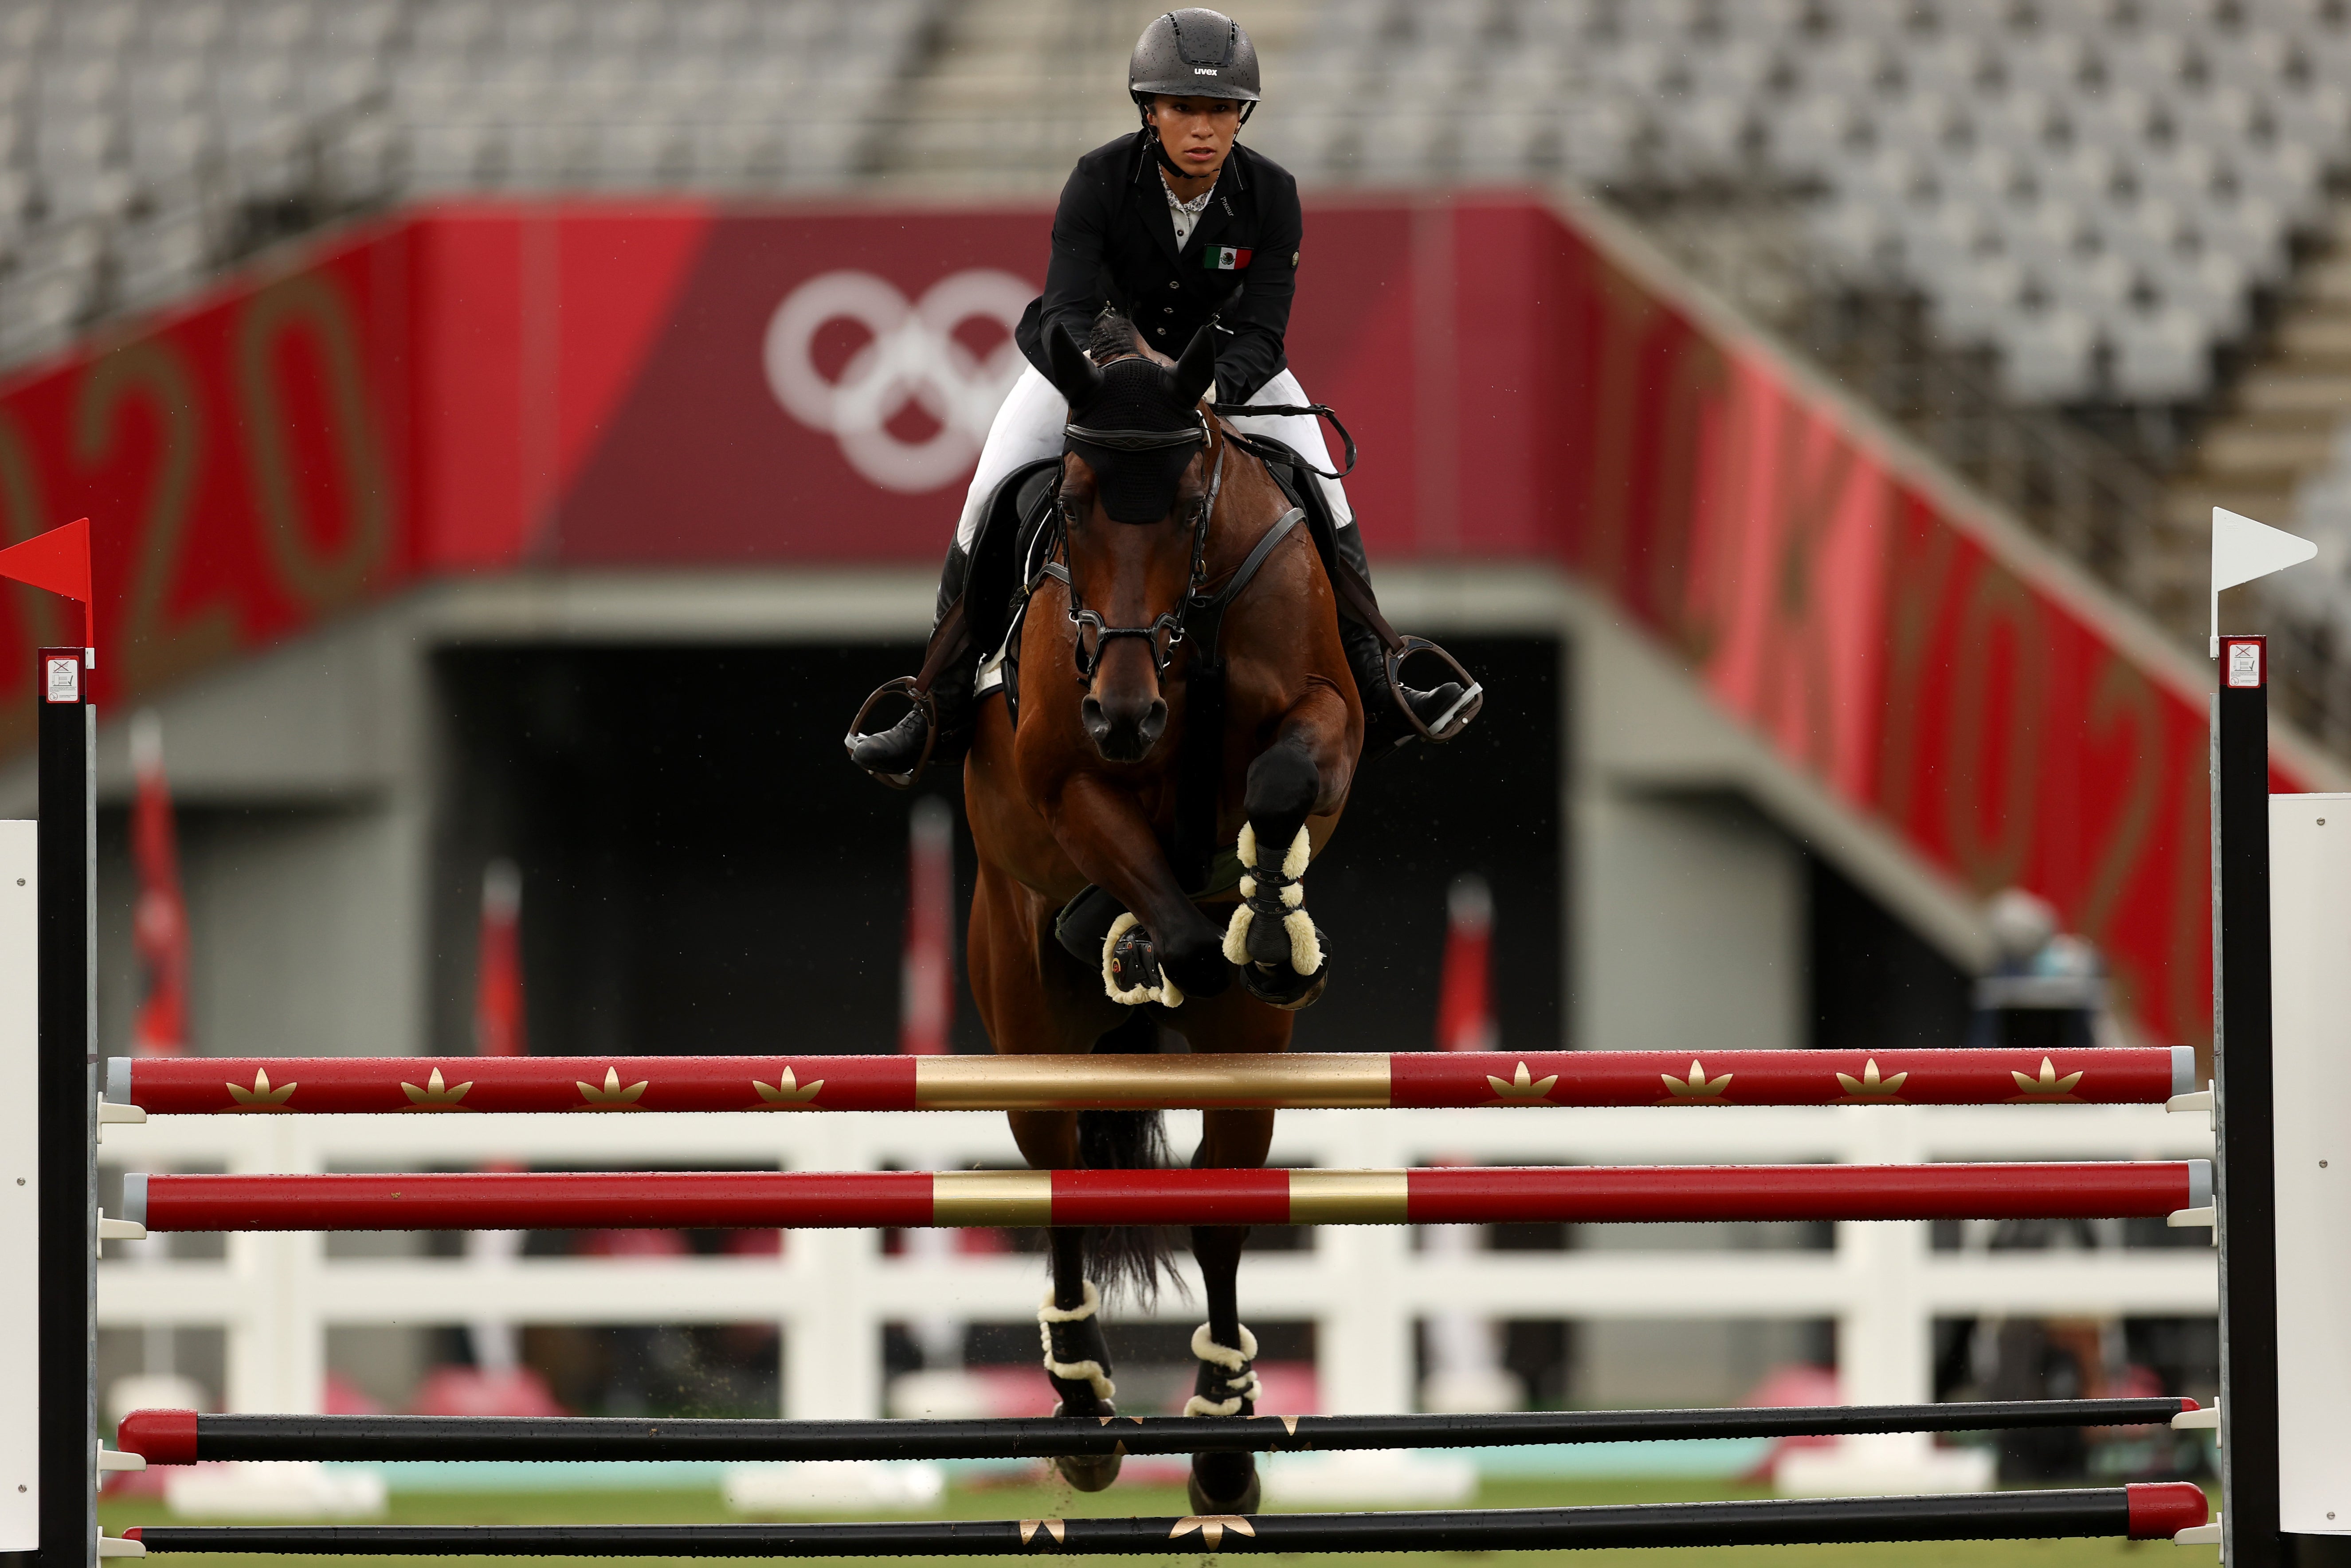 The horse riding element of modern pentathlon will be removed to preserve the sport’s Olympic future